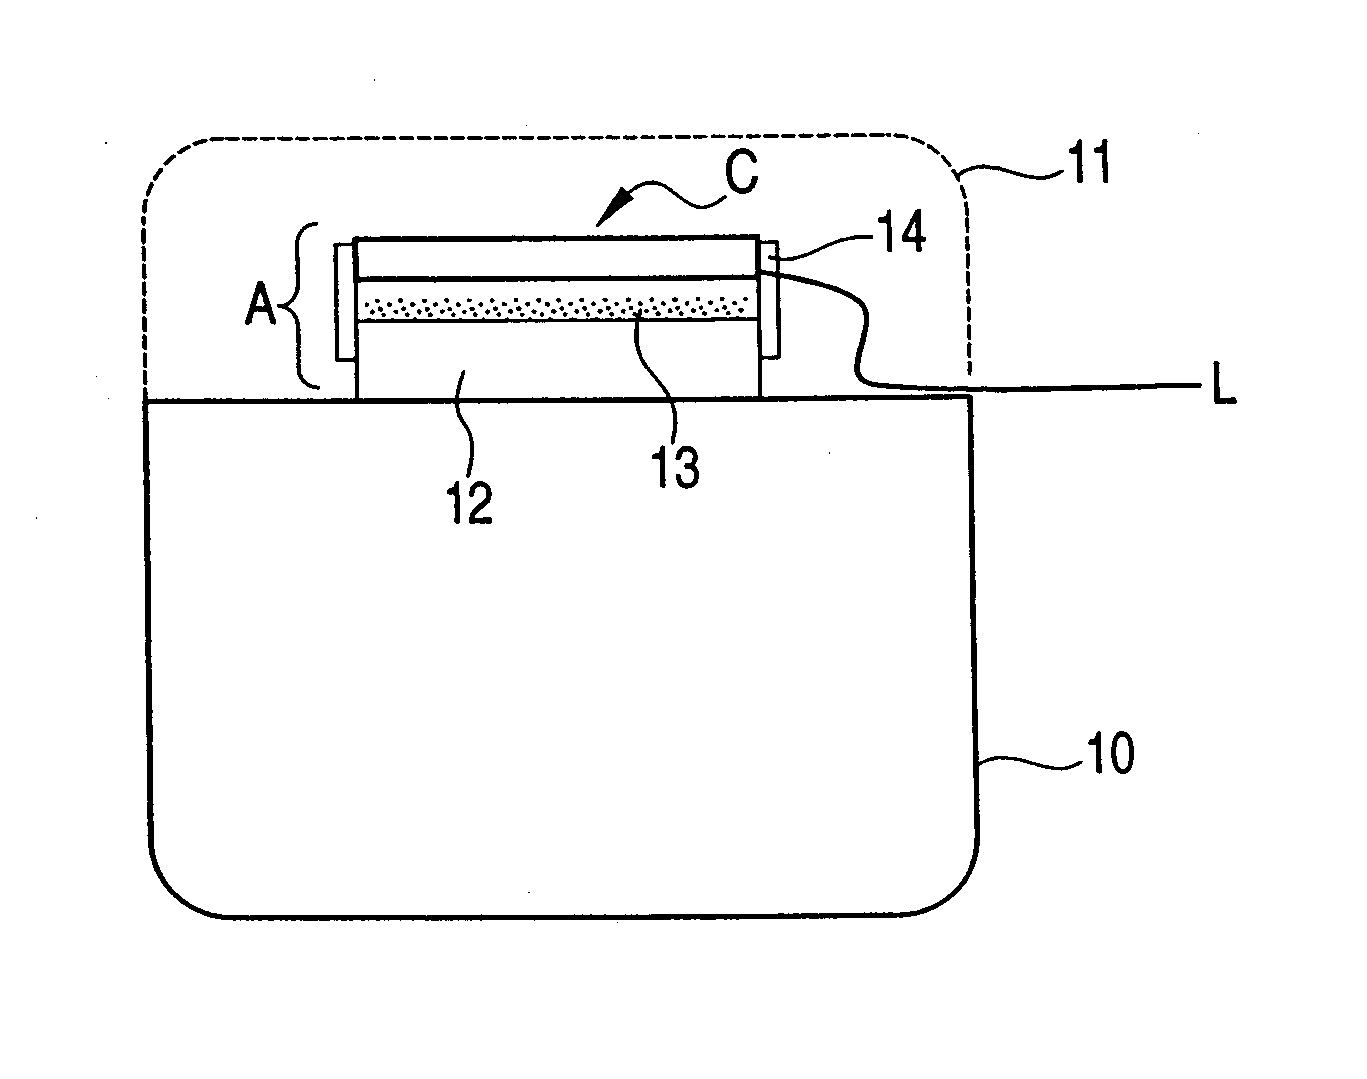 Solid oxide fuel cell device